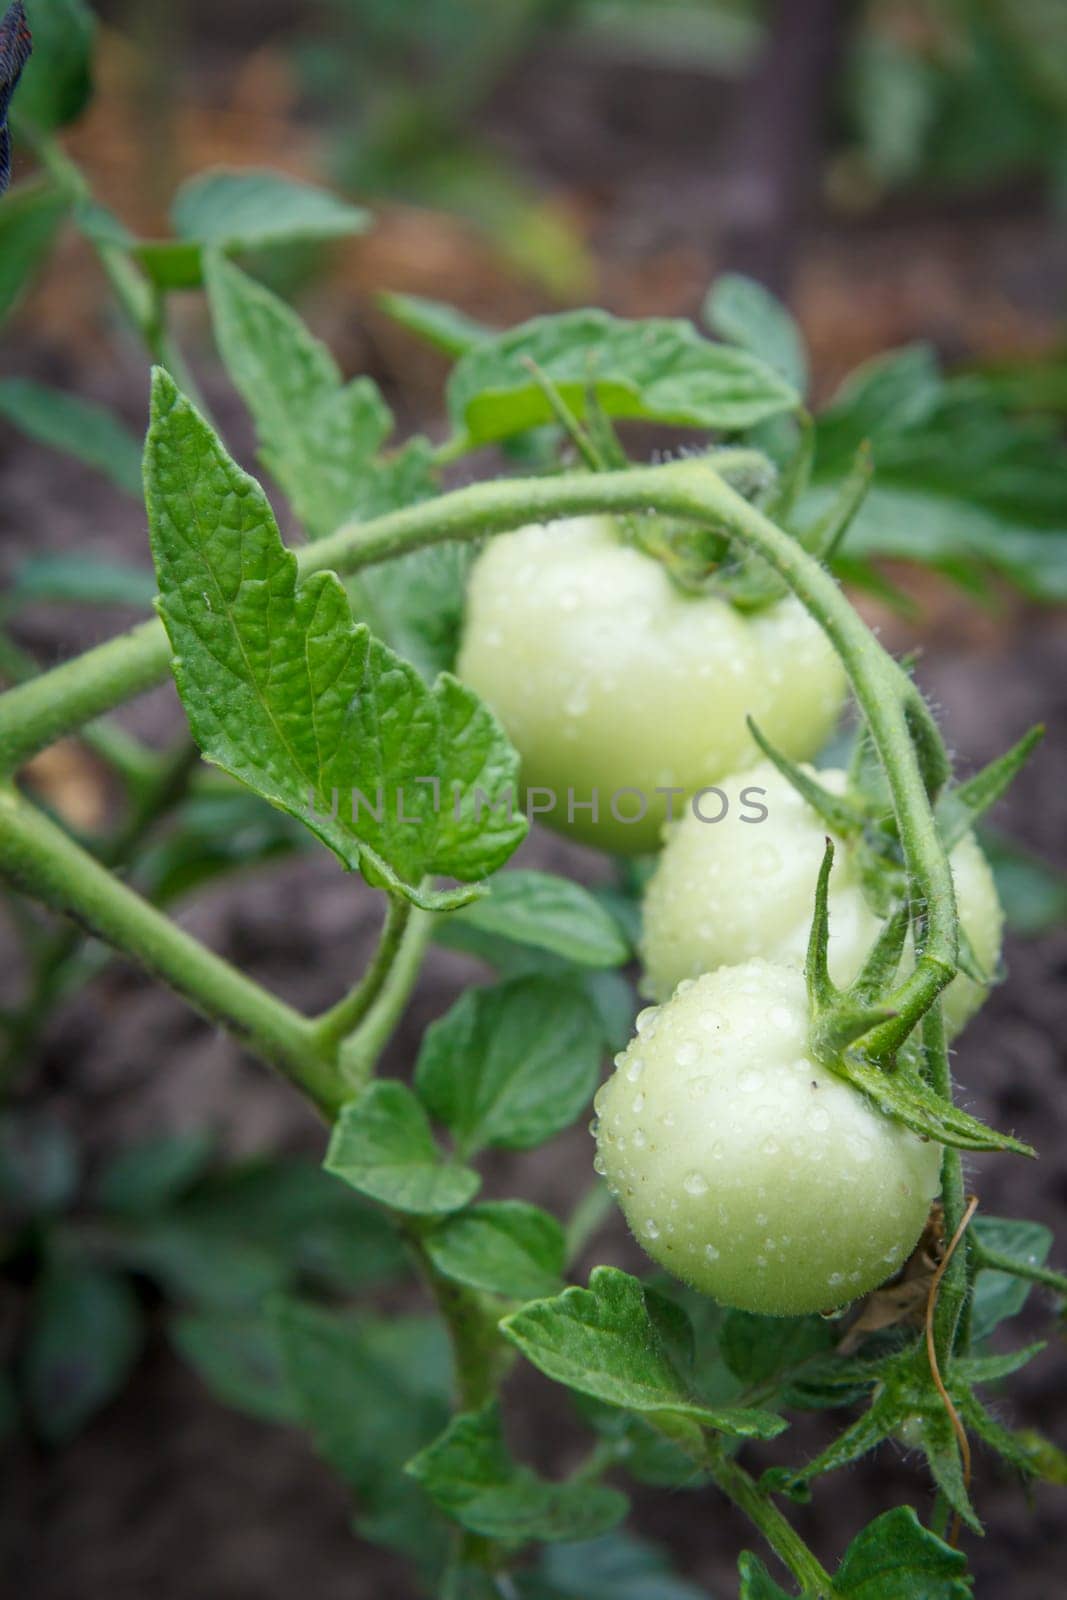 Unripe green tomatoes growing on bush in the garden. Cultivation of tomatoes in a greenhouse.